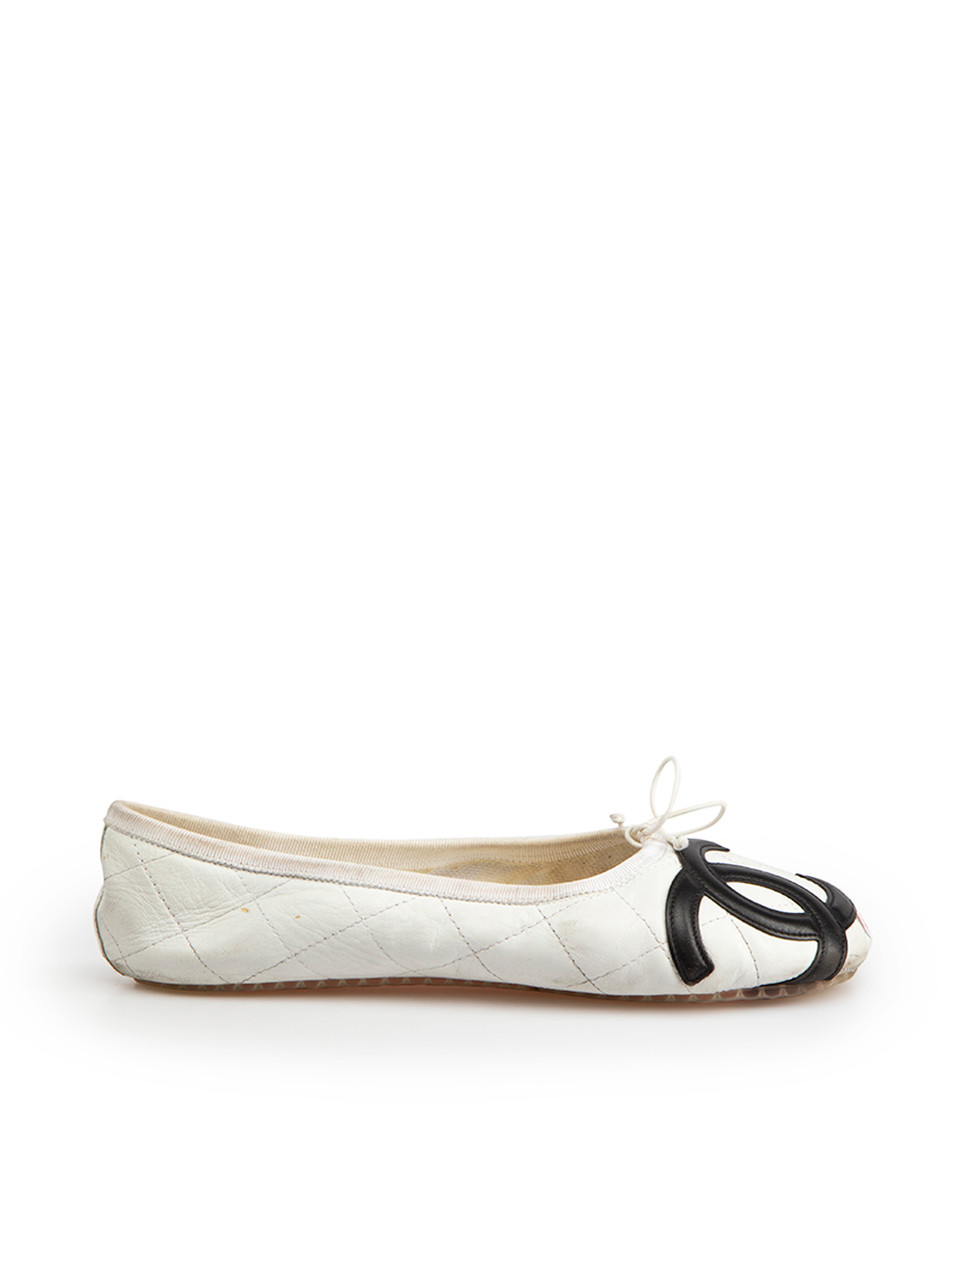 Used Chanel Vintage White Leather Cambon Ballet Flats